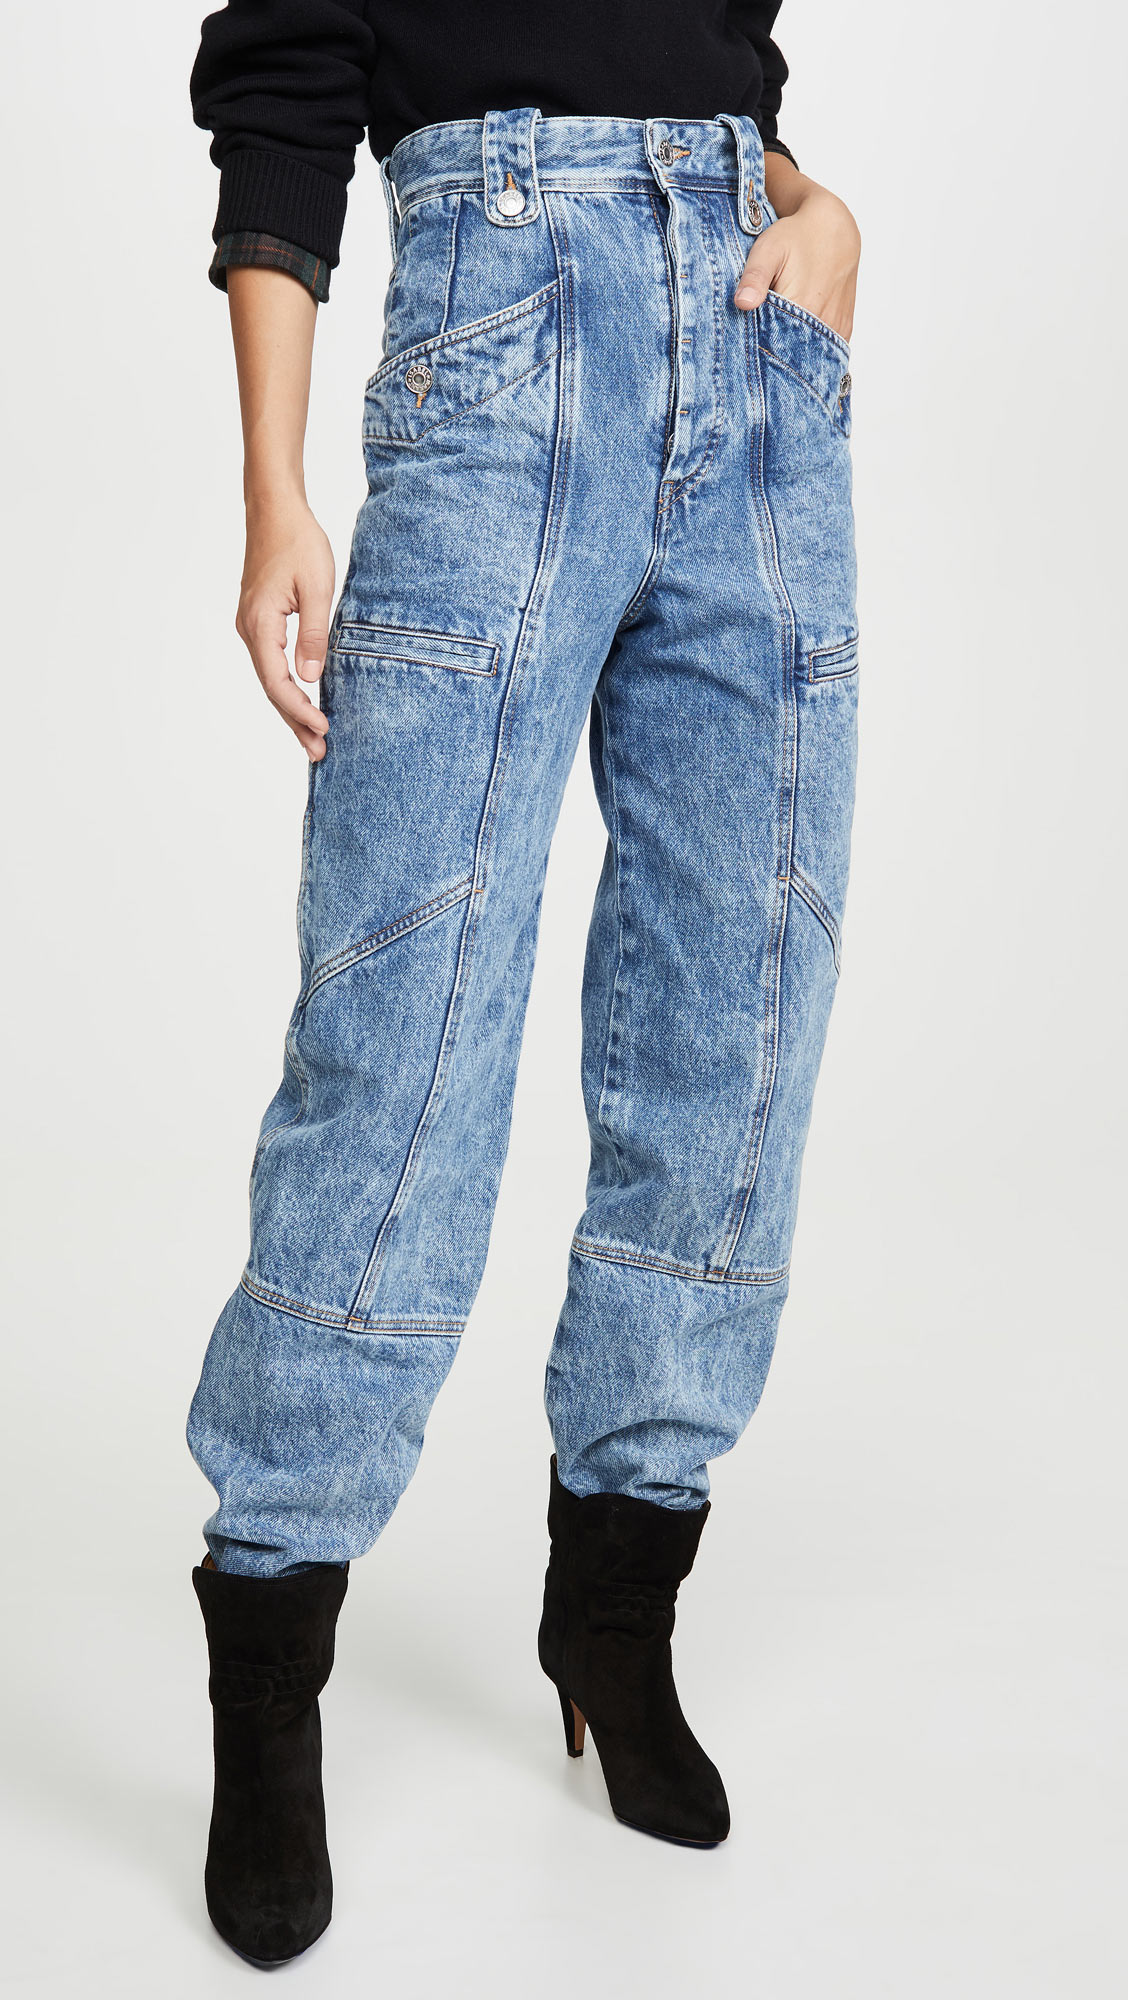 10 Statement Making Jeans For Fall 2019 - THE JEANS BLOG